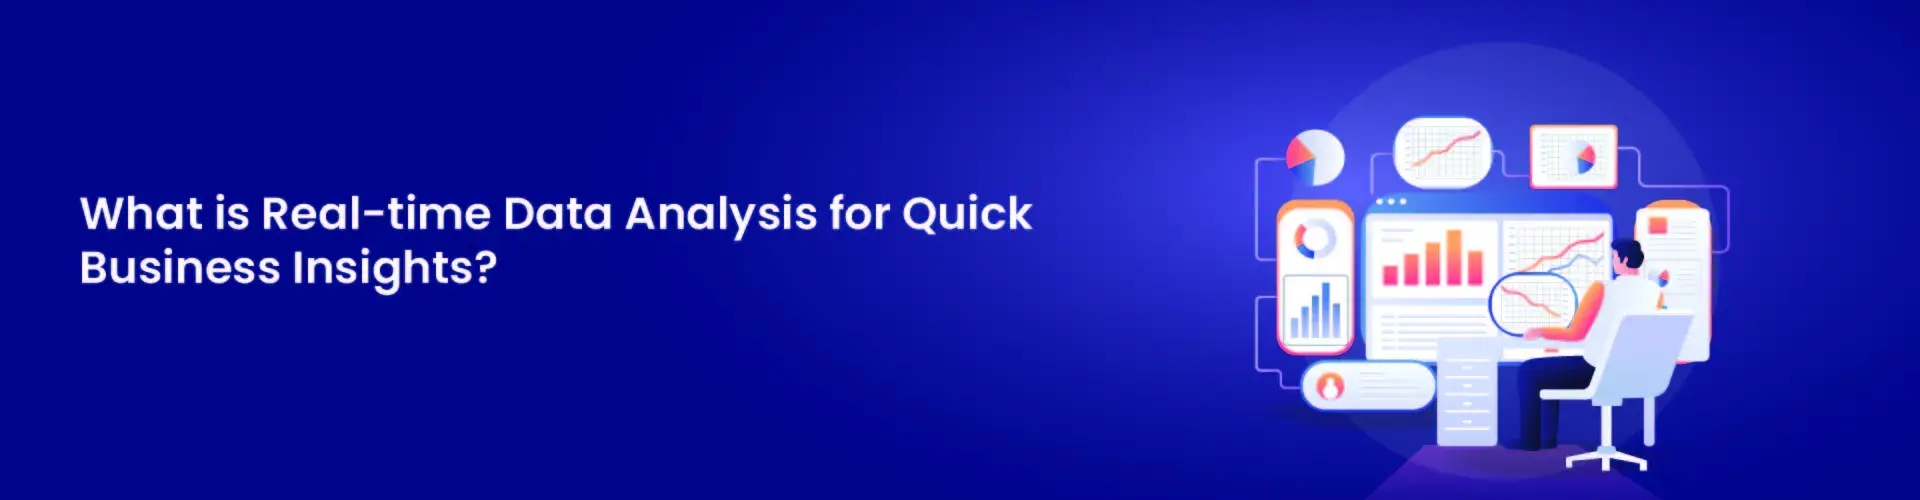 What is Real-time Data Analysis for Quick Business Insights?